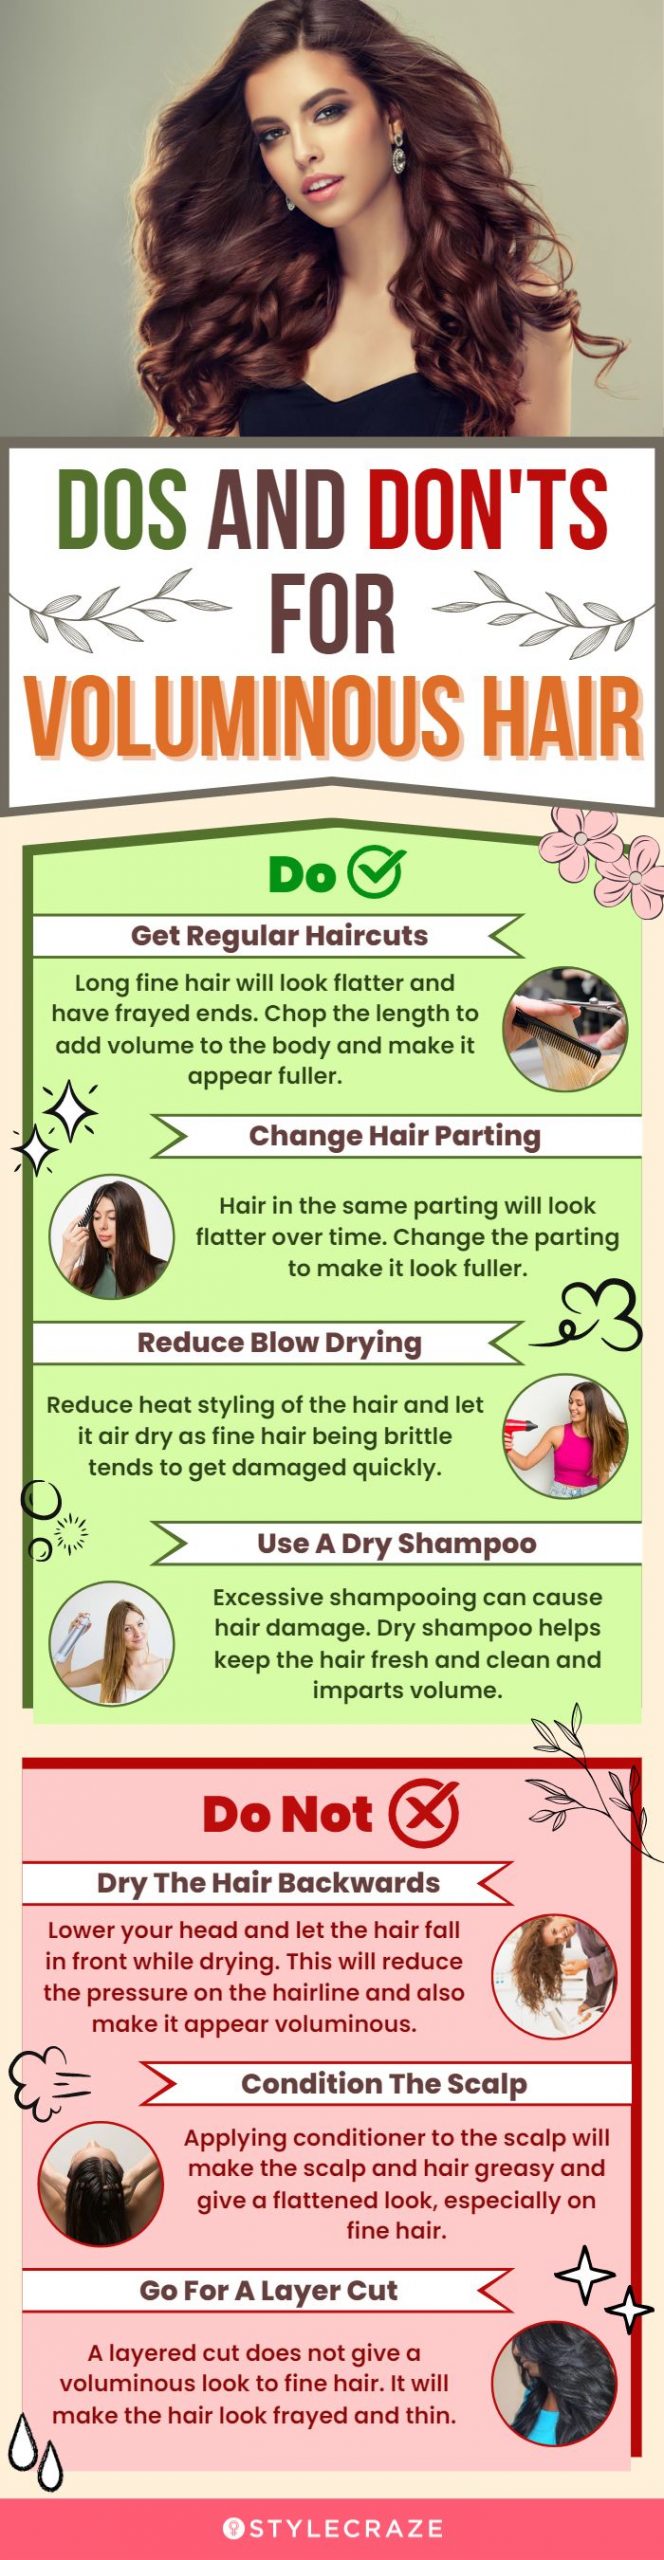 Dos And Donts For Voluminous Hair (infographic)